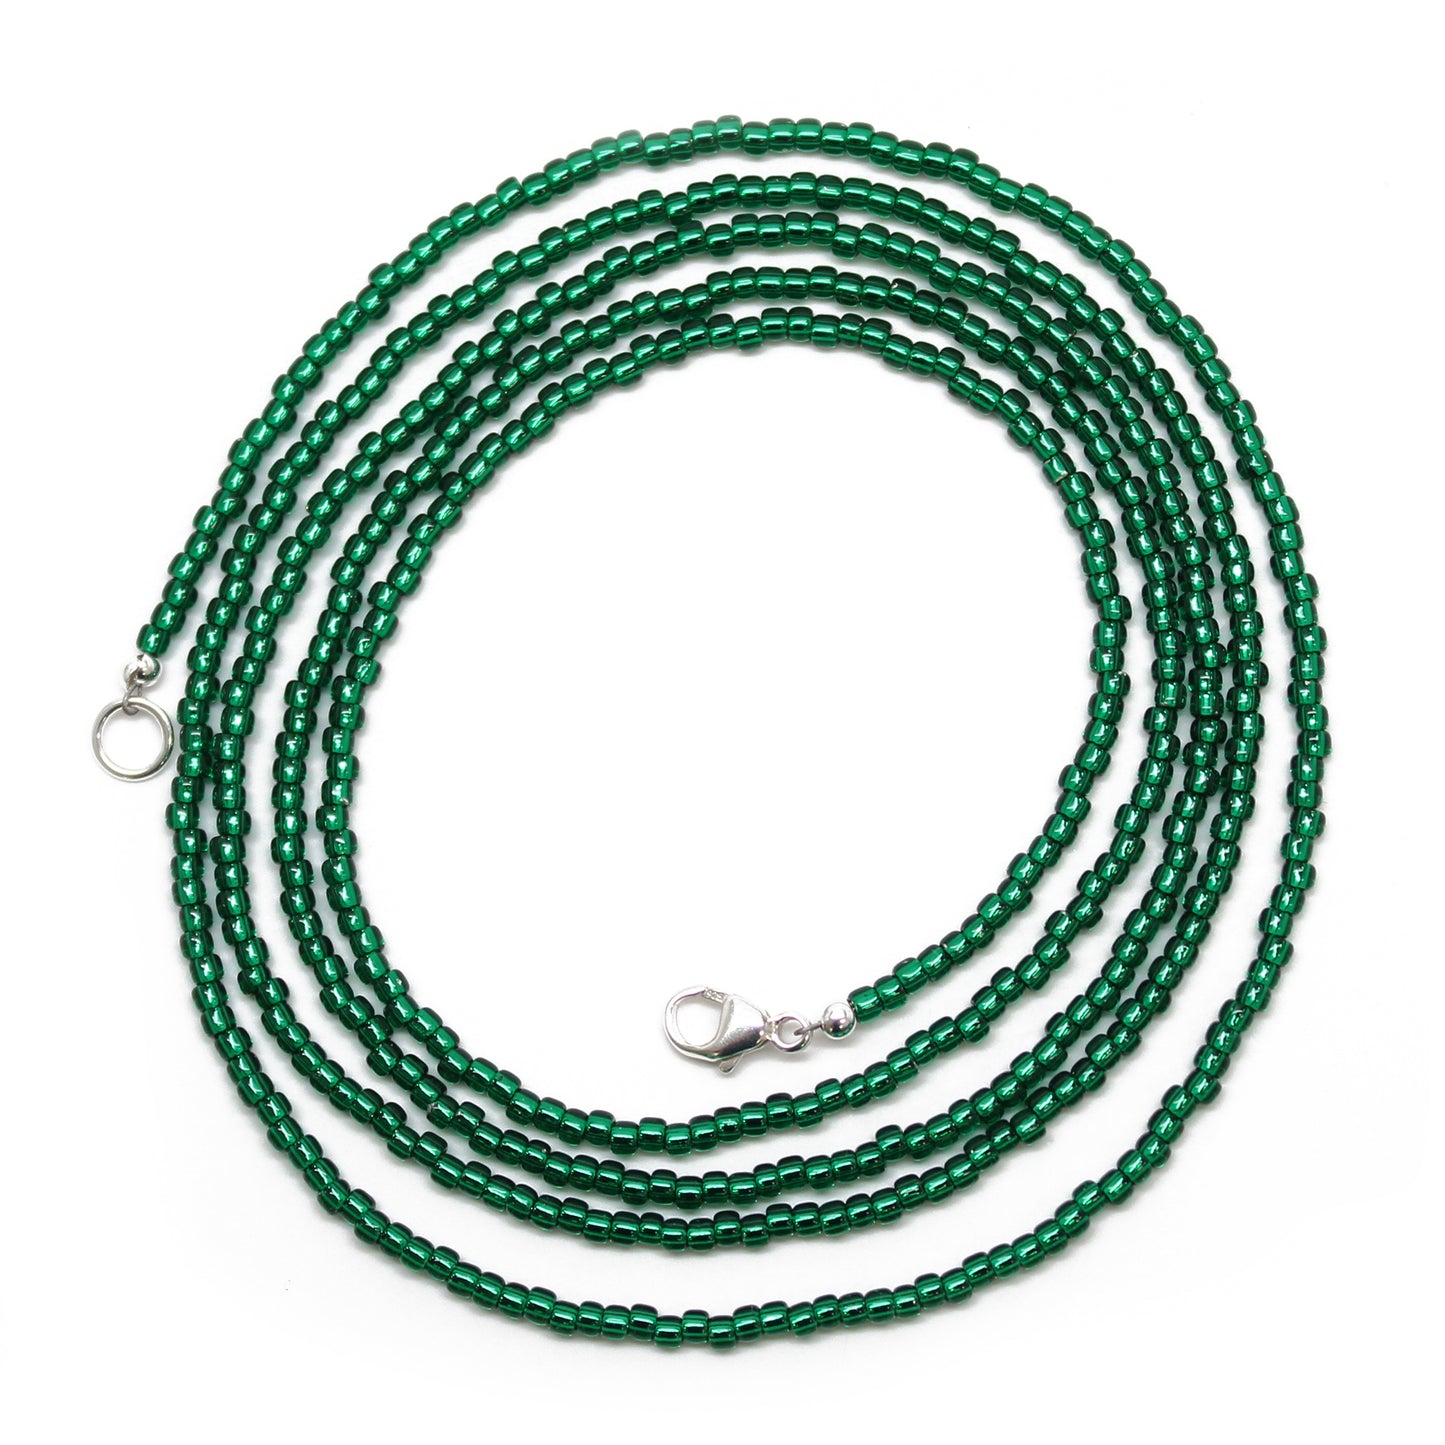 Emerald Green Seed Bead Necklace, Thin 1.5mm Single Strand